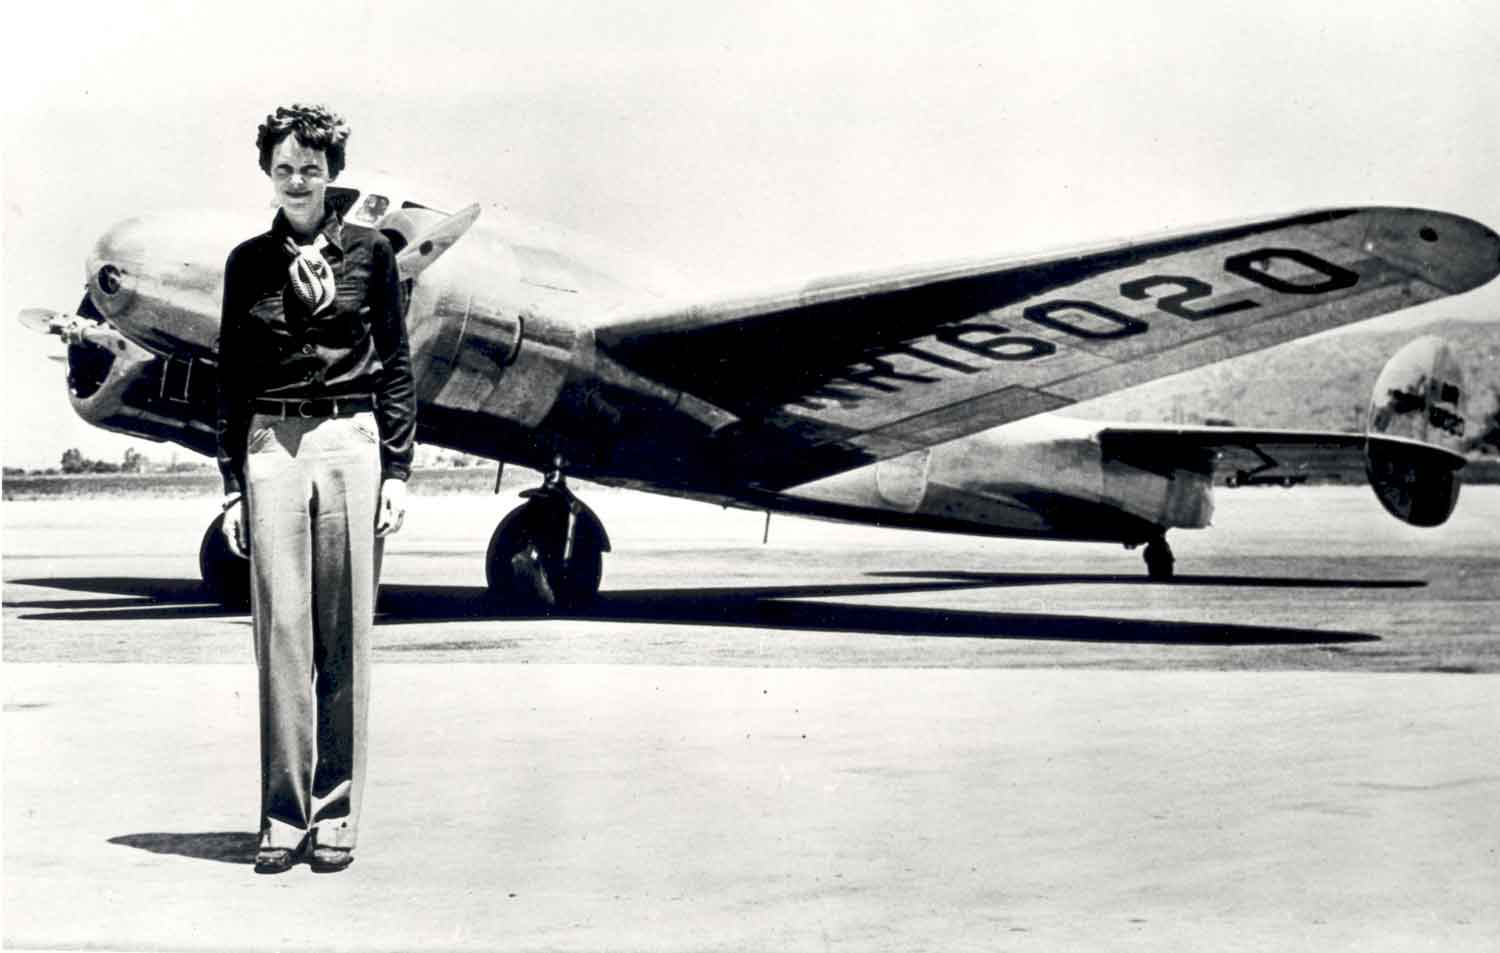 Amelia Earhart poses in front of her plane.